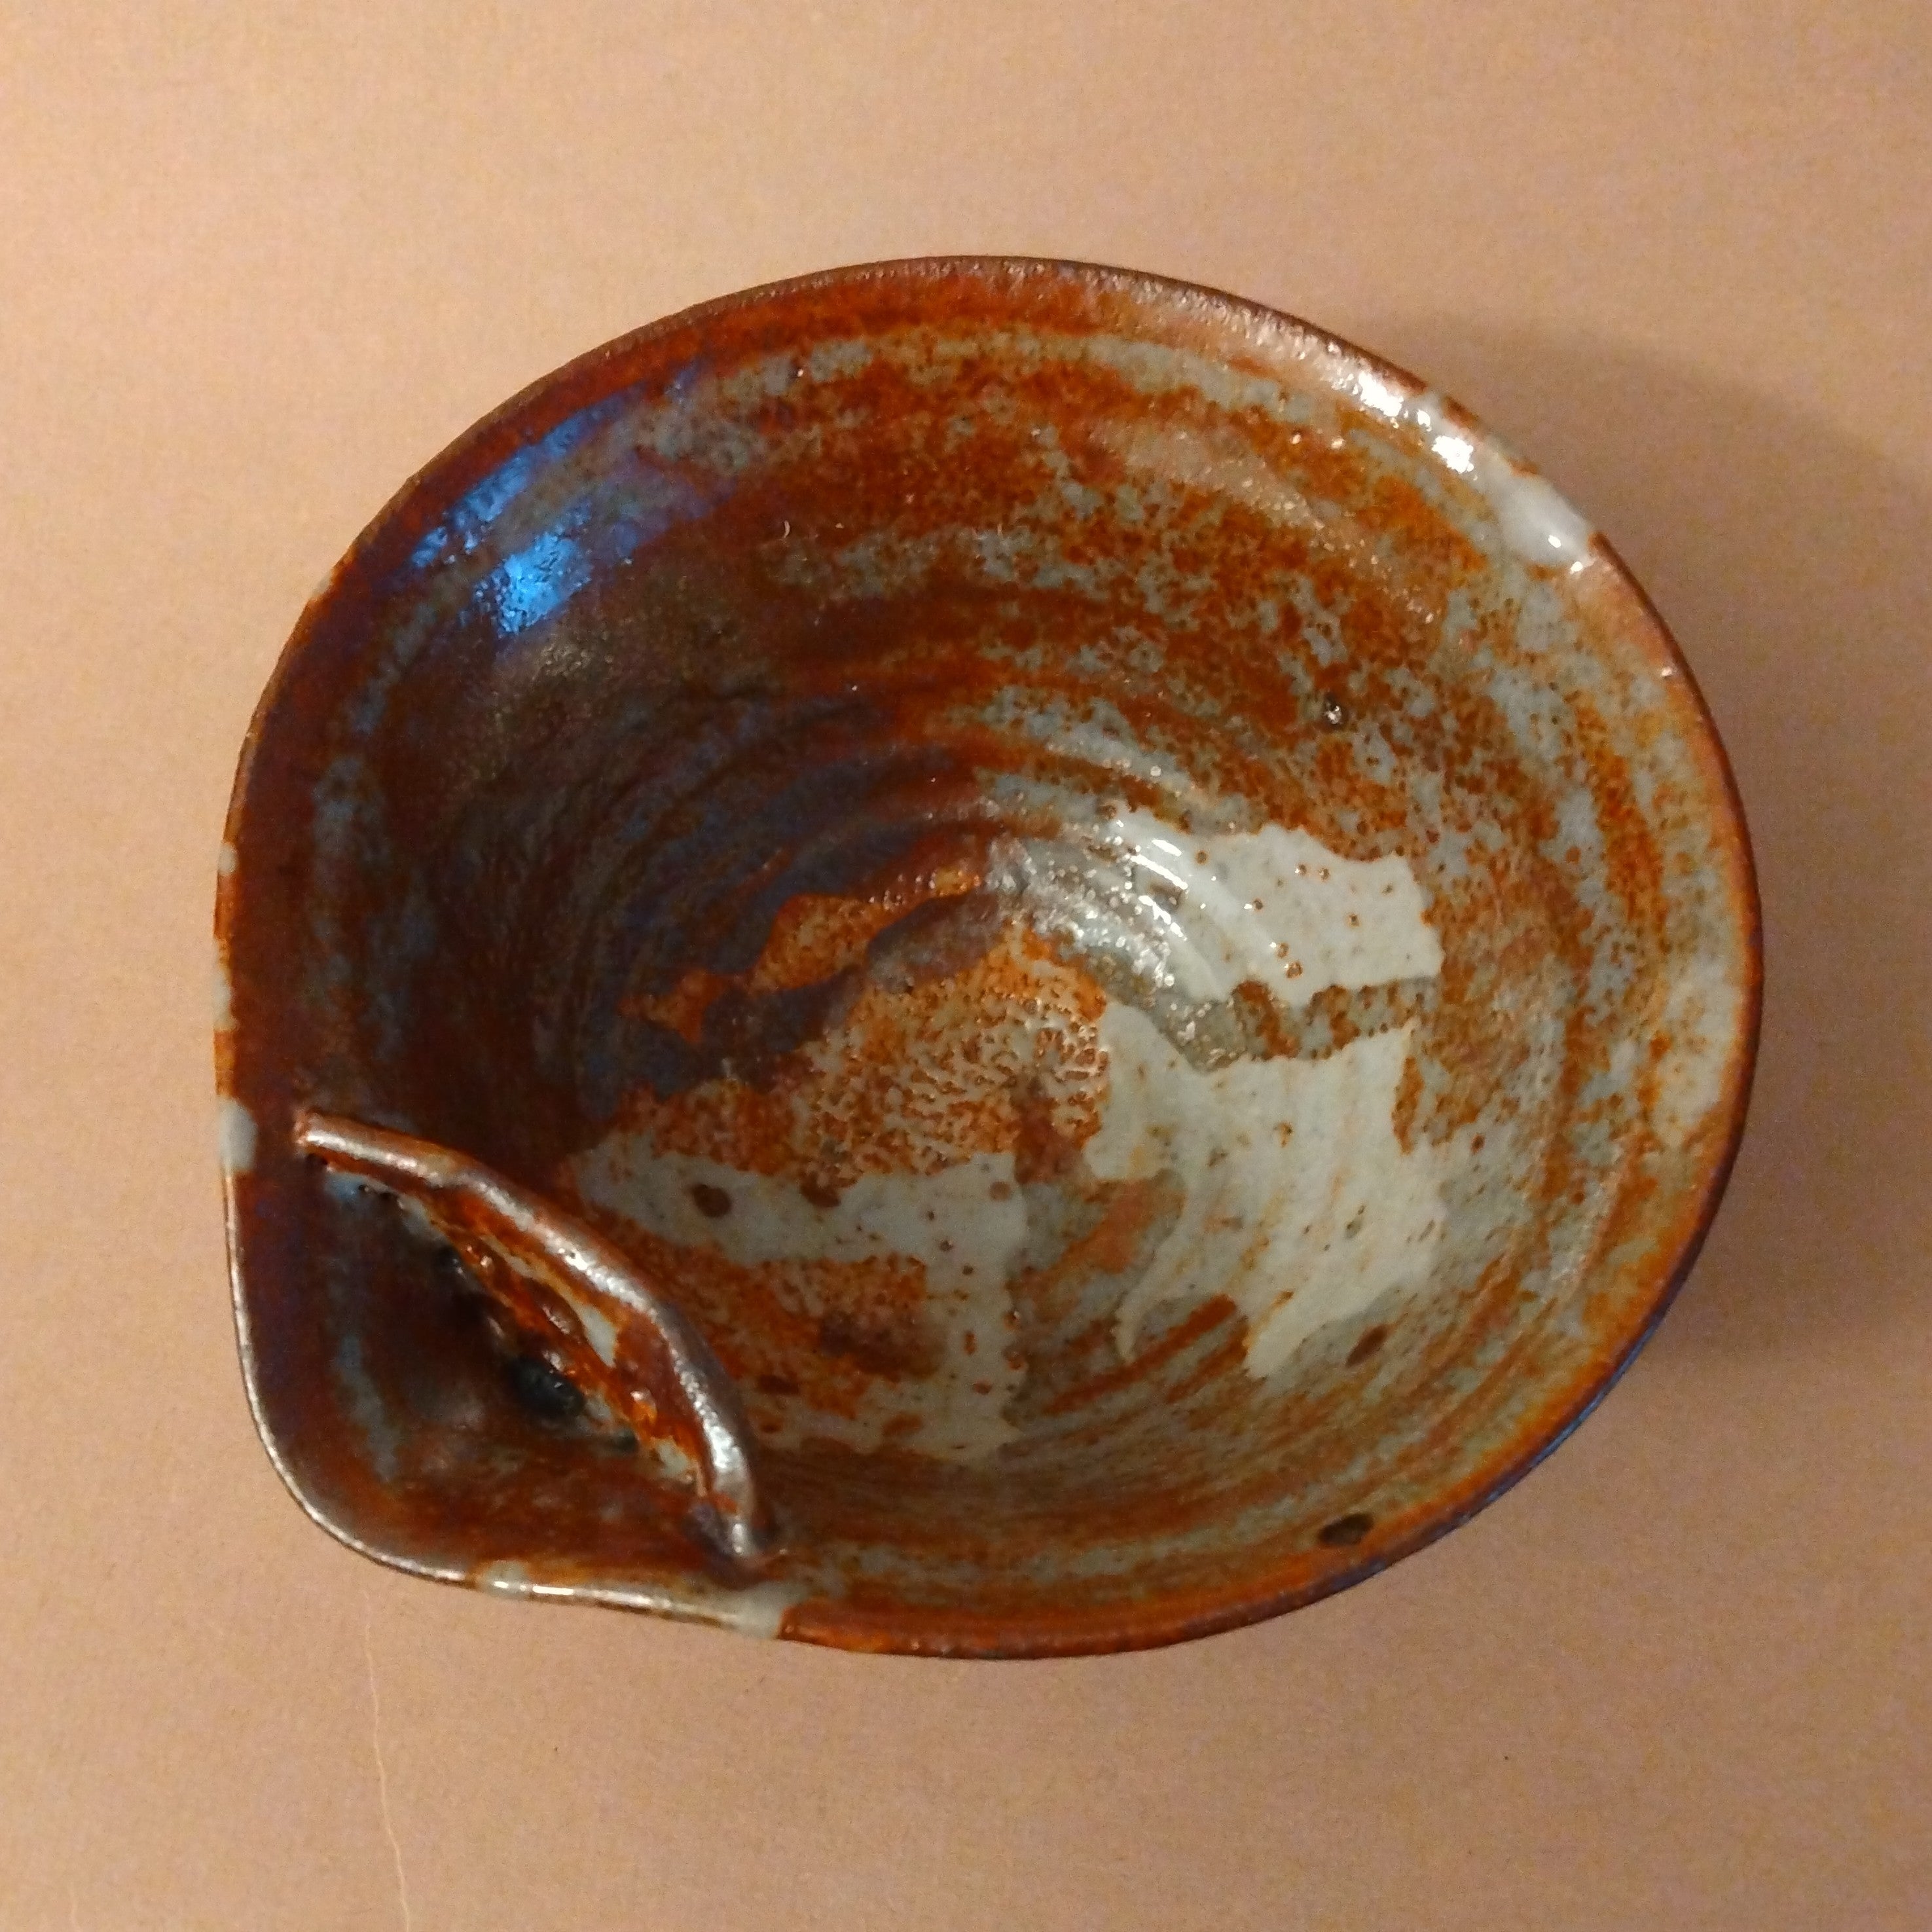 20% to Wajima Earthquake Relief - Katakuchi, Spouted Bowl, with built-in strainer, by George Gledhill